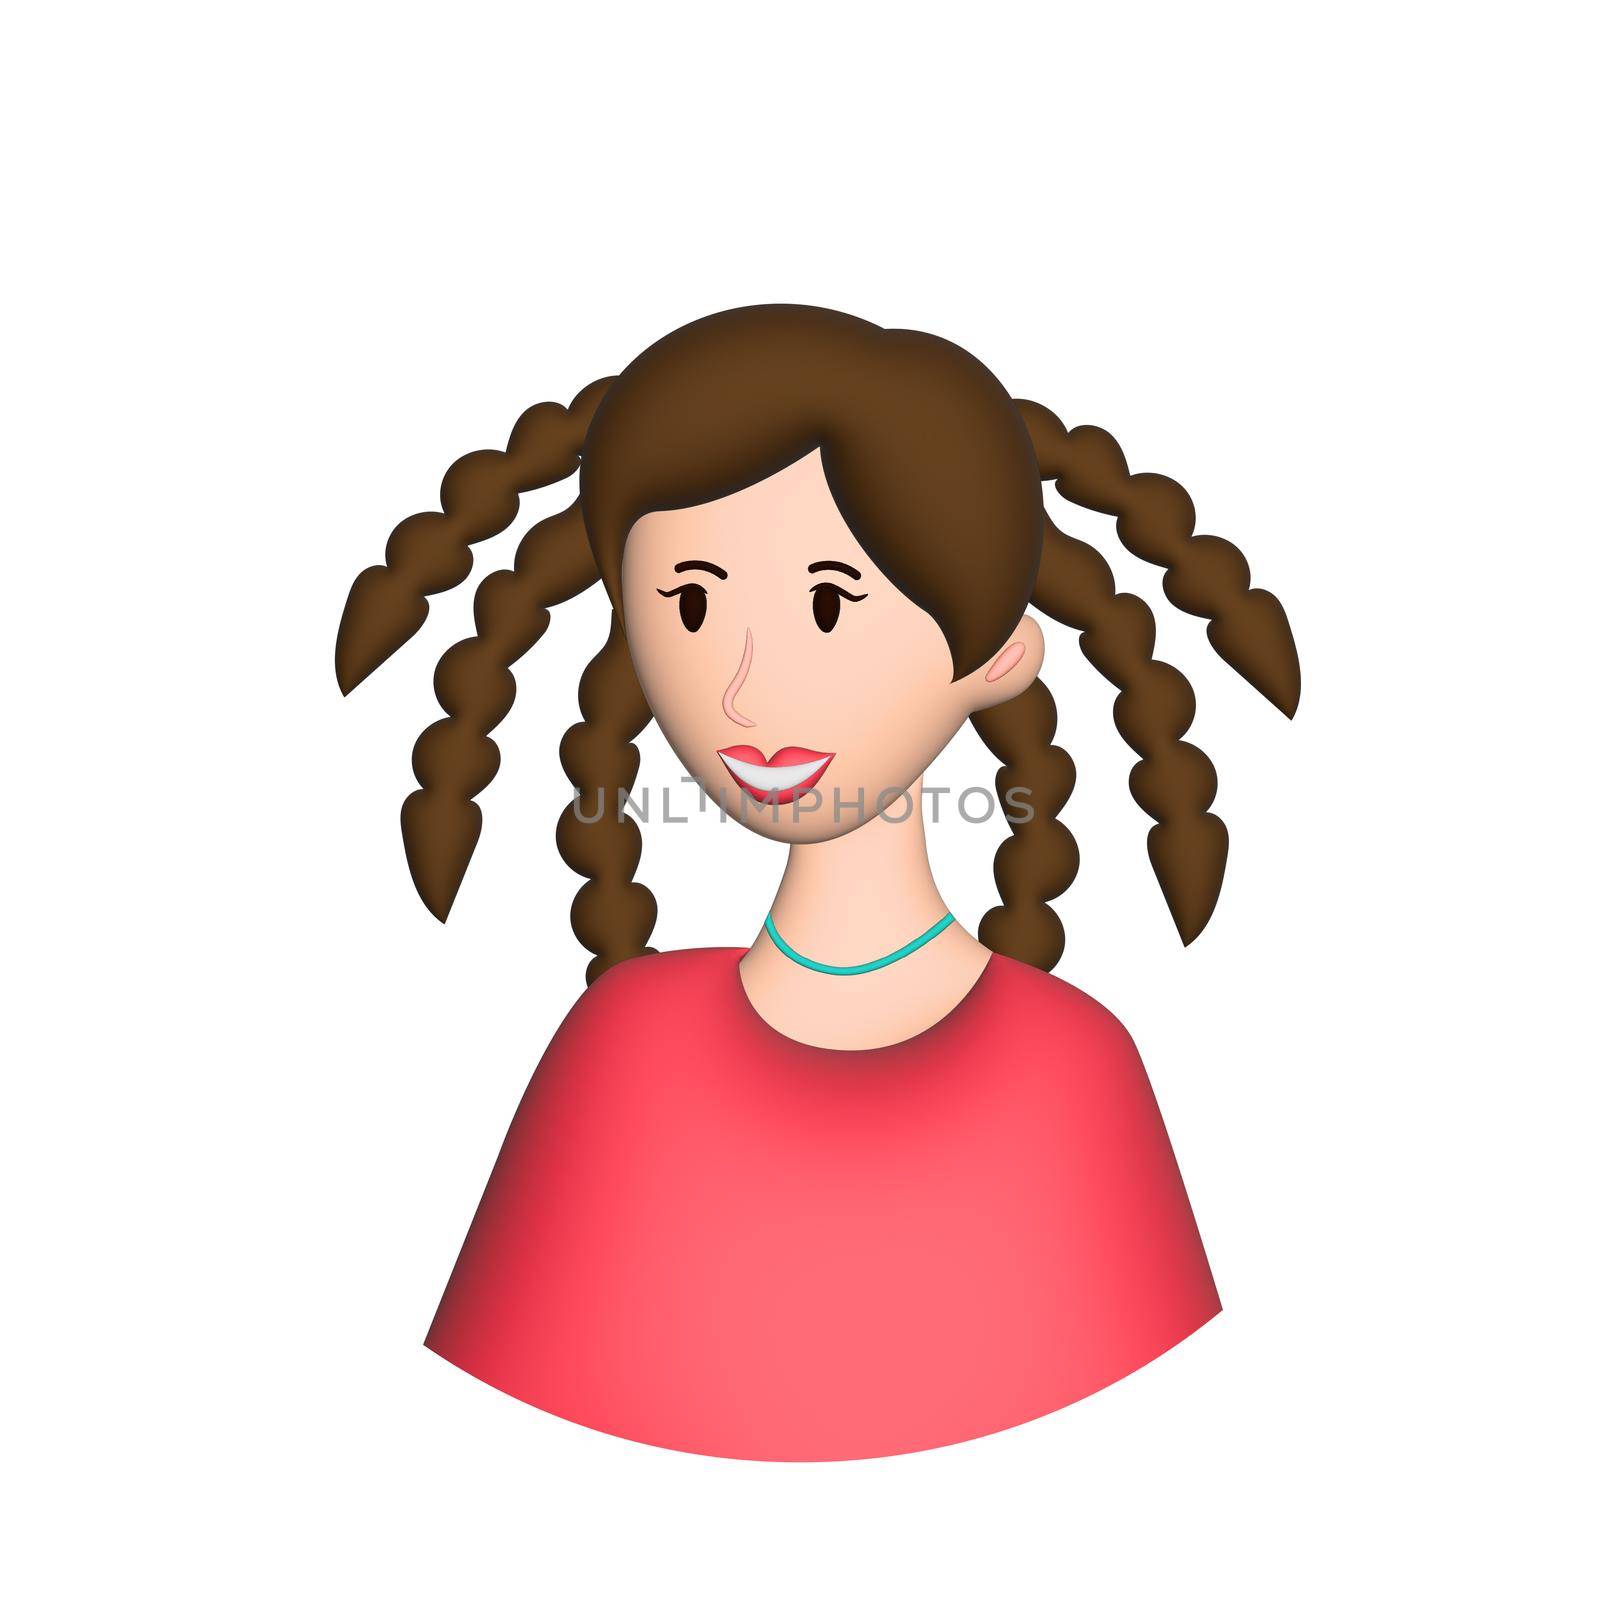 Web icon man, girl with many braids by BEMPhoto